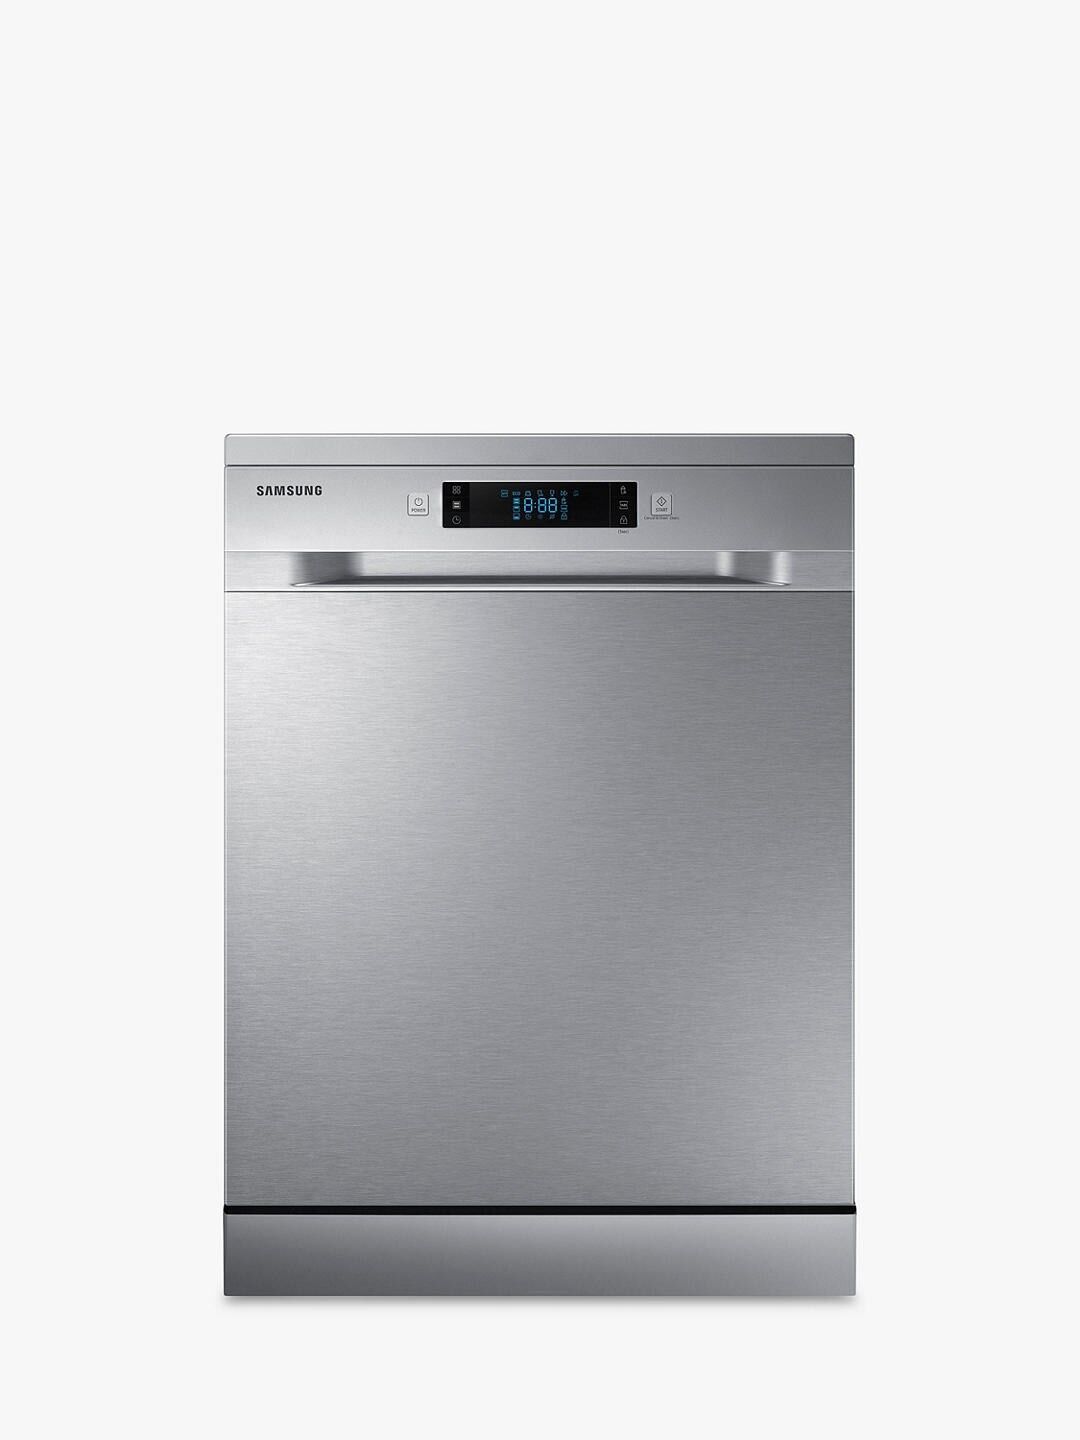 SAMSUNG Series 6 DW60M6050FS Freestanding 60cm Dishwasher 14 Place Setting - Stainless Steel *Display Model*